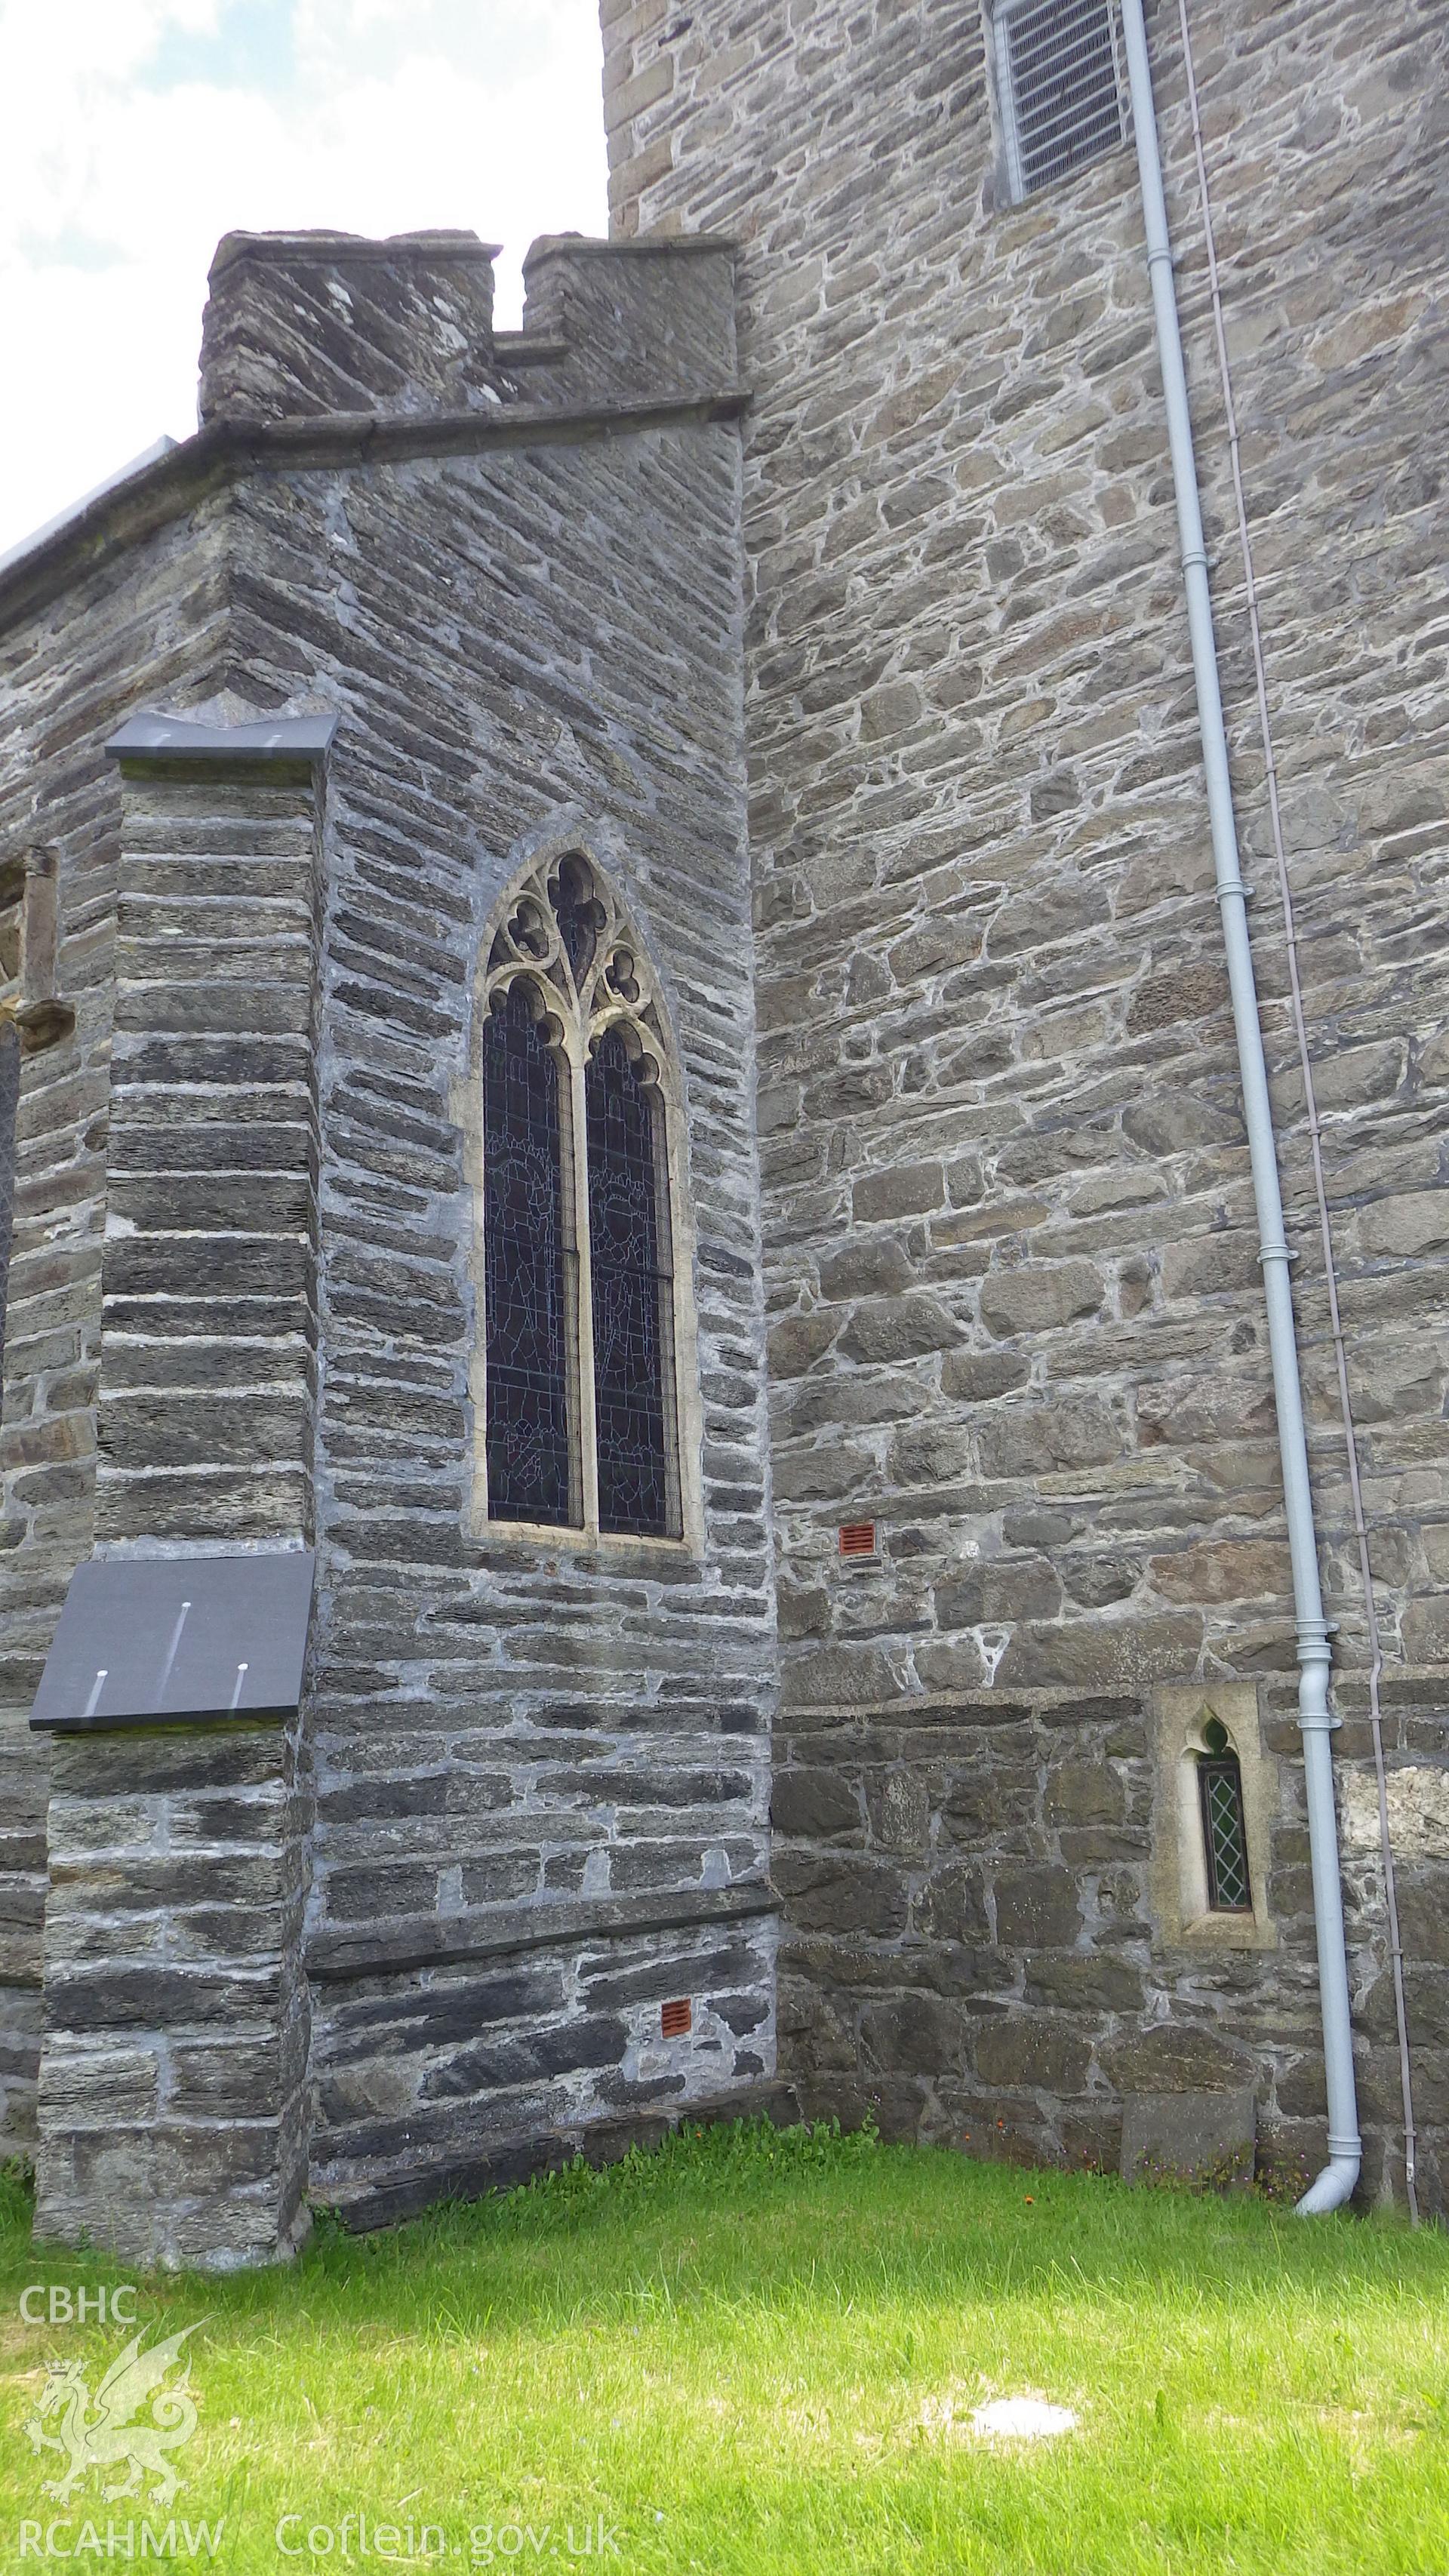 Northern facade - join of tower to the main body of the church showing difference in stonework